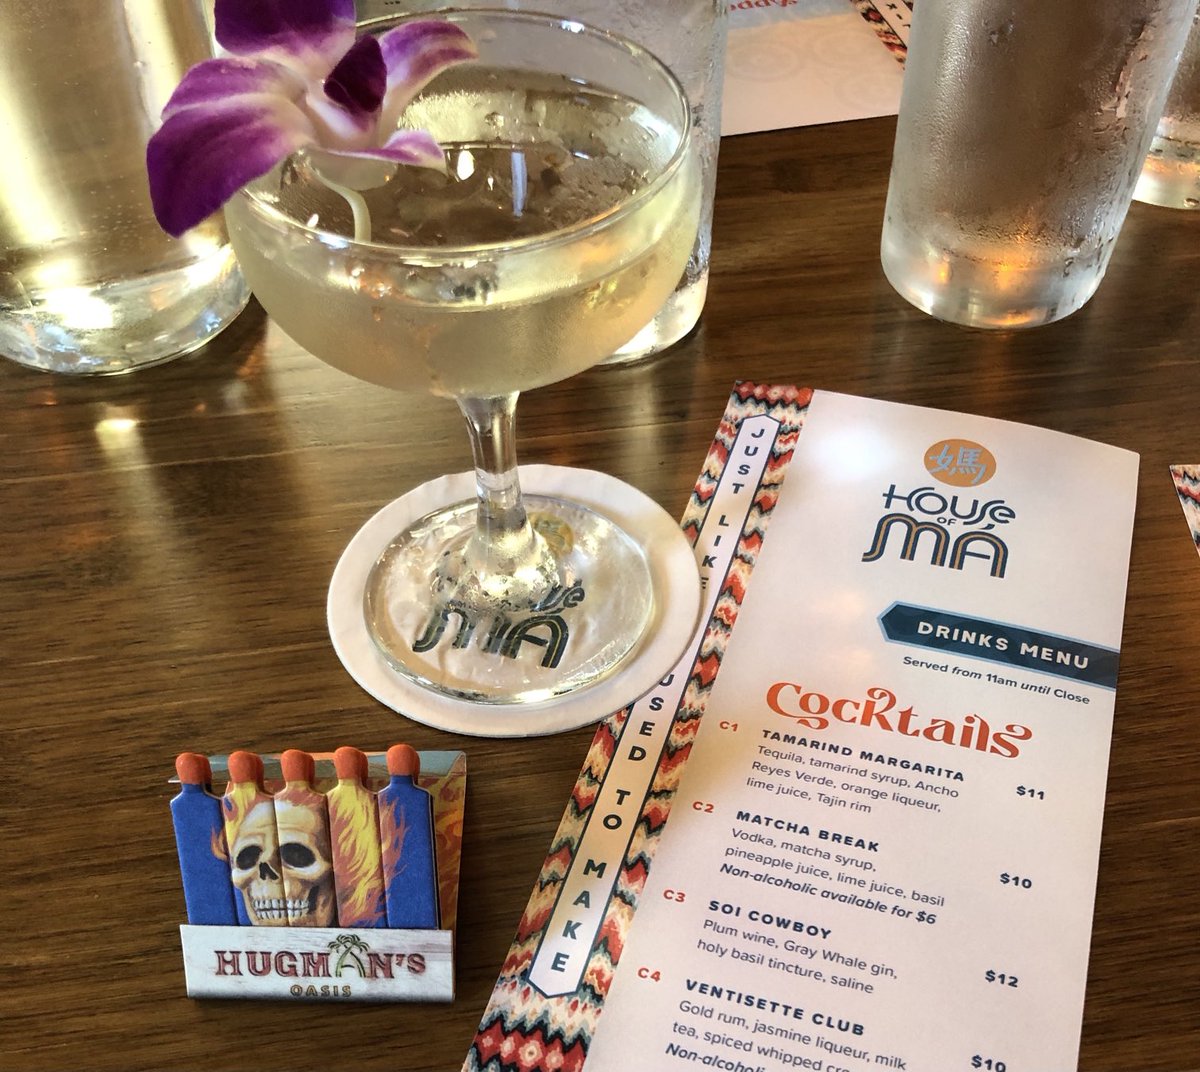 If you visit the new House of Ma in San Antonio, the cocktail to order is the Soi Cowboy made with ⁦⁦@graywhalegin⁩ ...